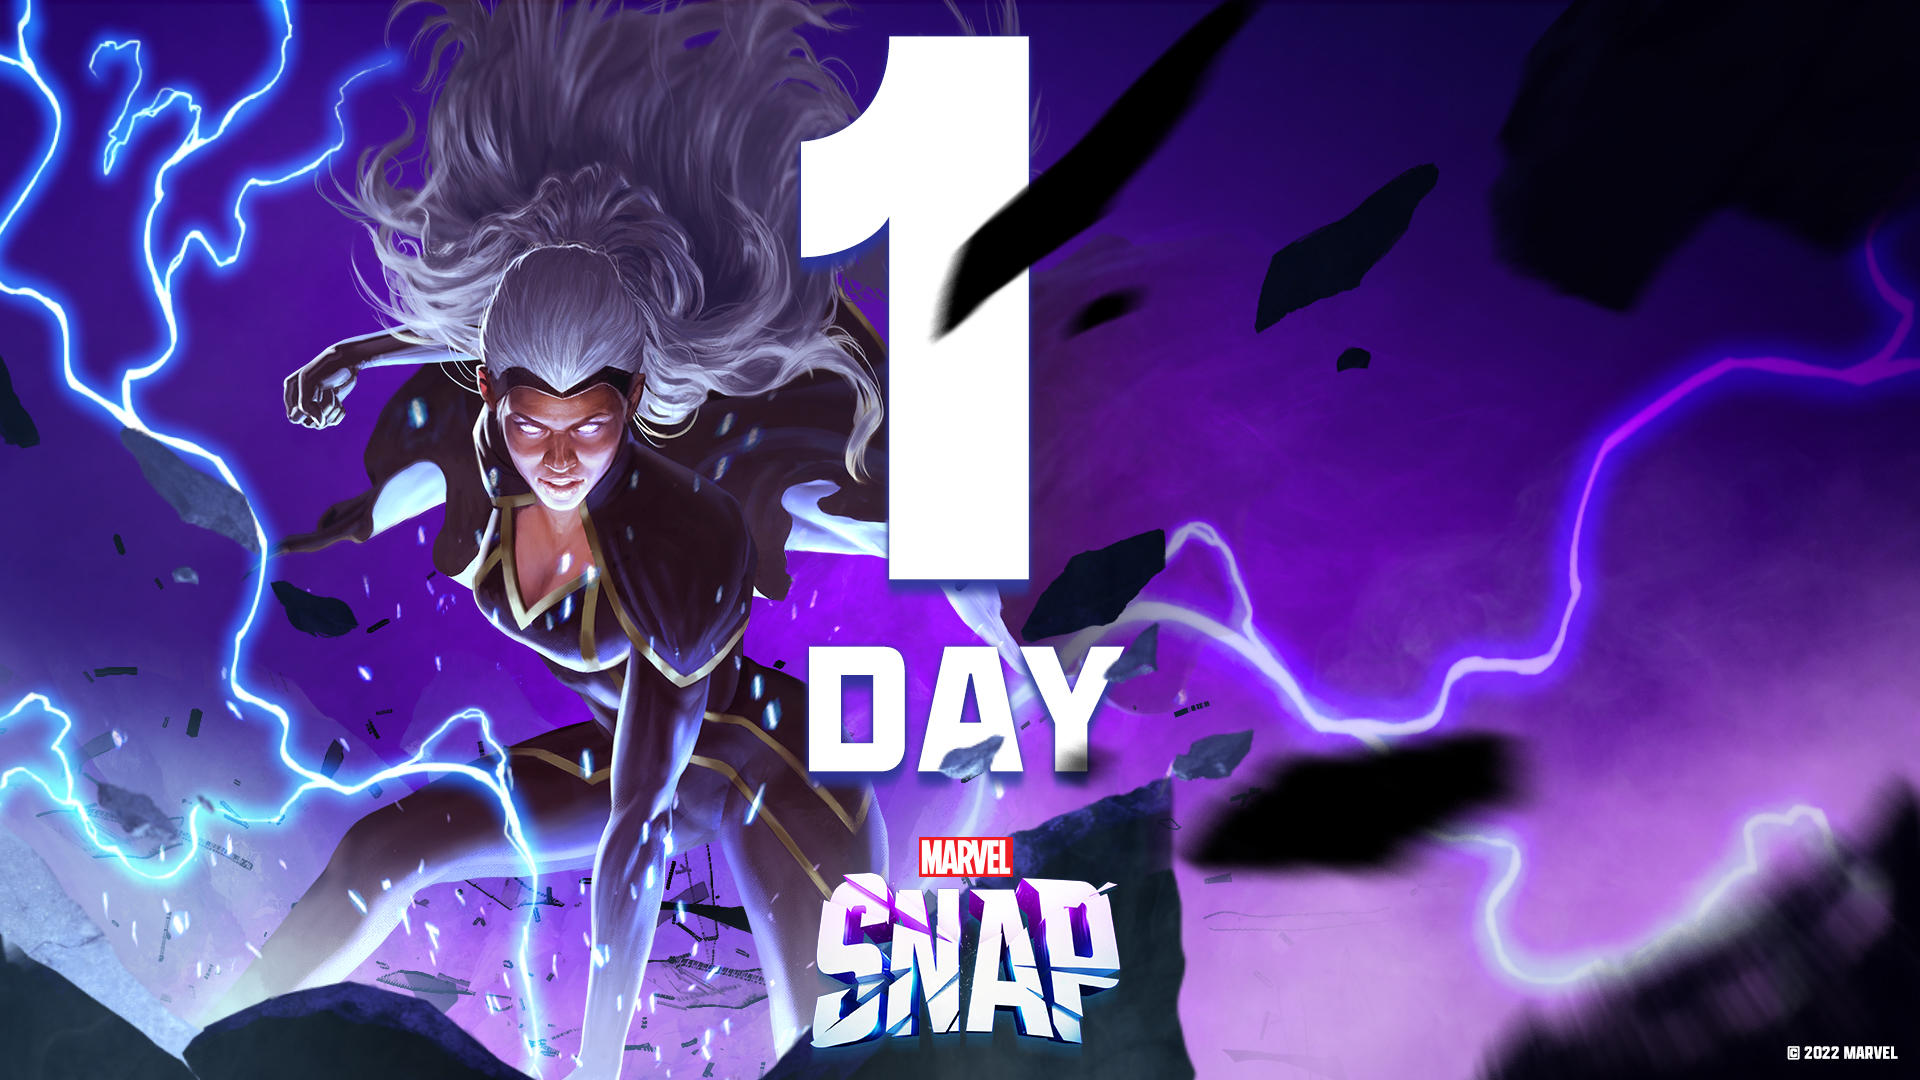 Everything you need to know about Marvel SNAP launching October 18, 2022